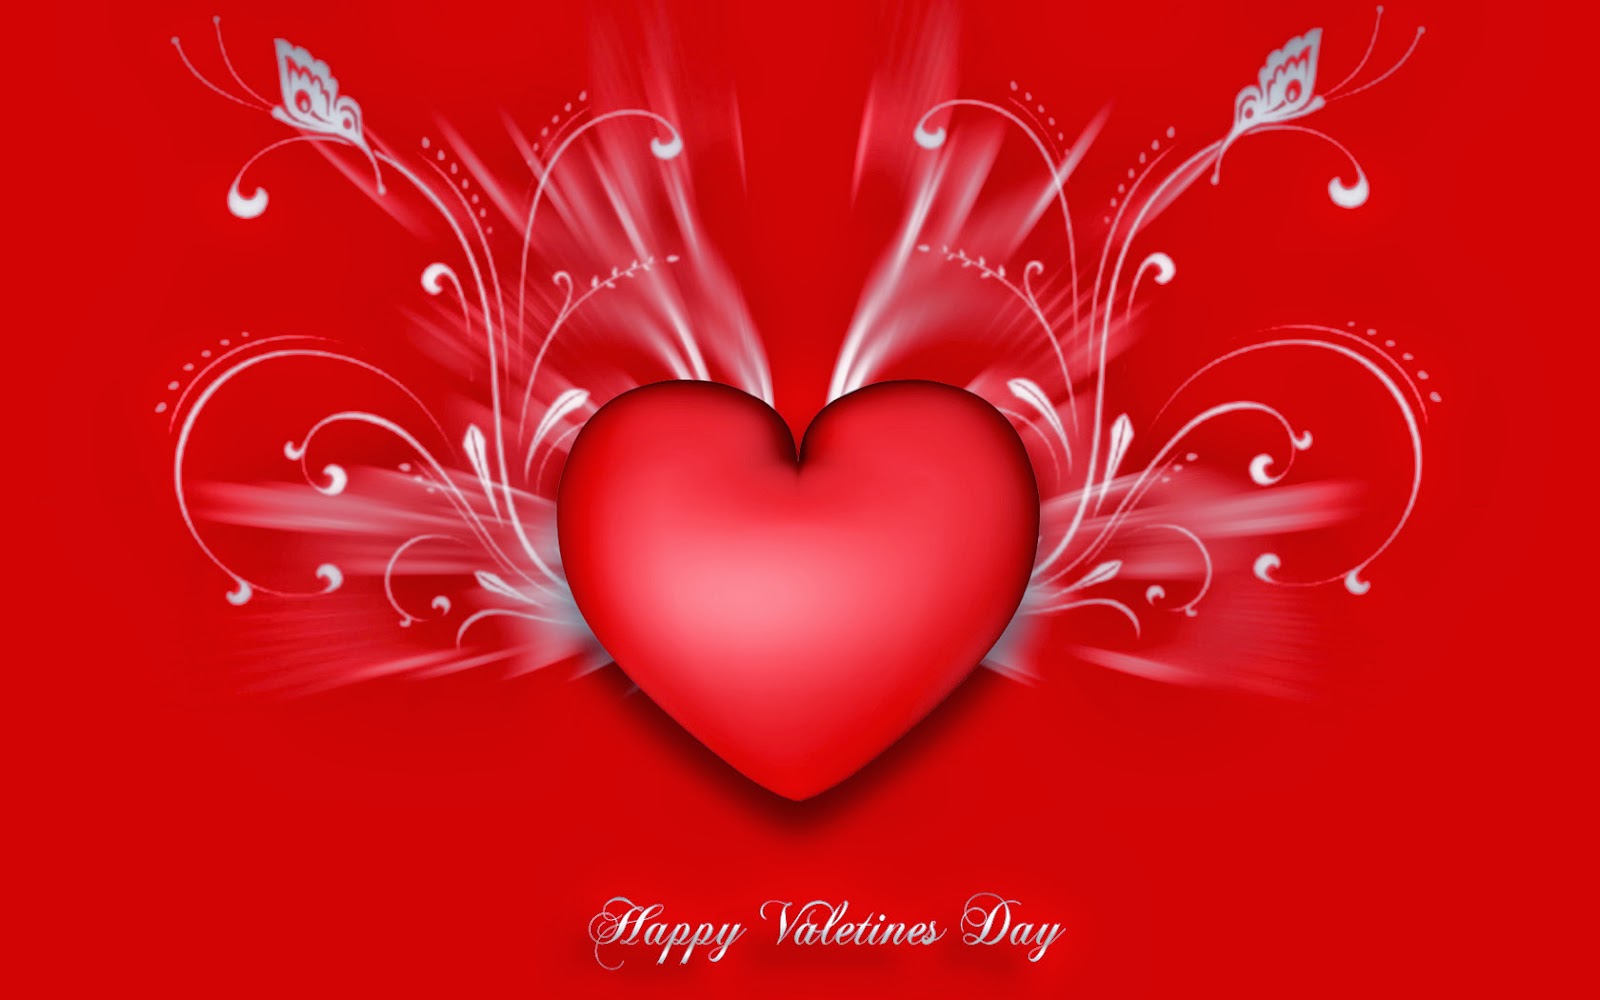 Wallpaper Valentines Day February 14 Red Heart Love Background   Download Free Image